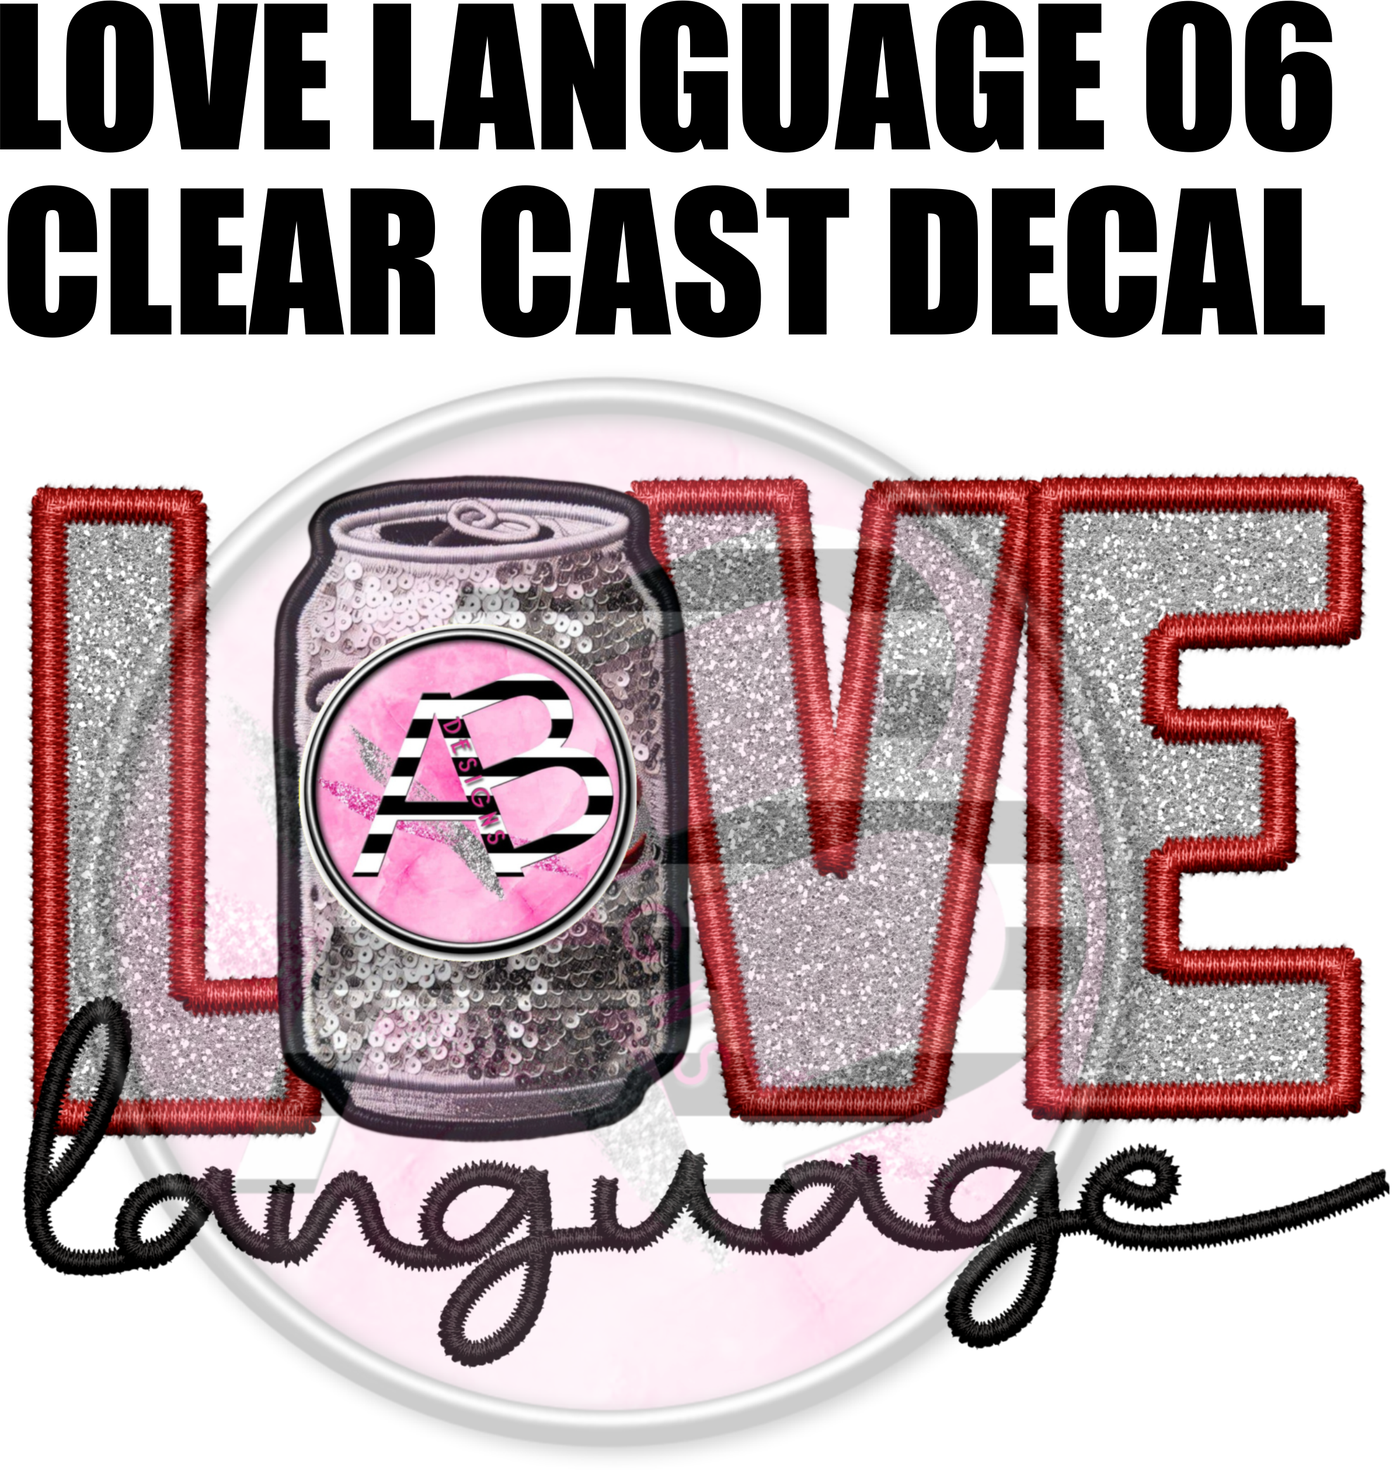 Love Language 06 - Clear Cast Decal-416